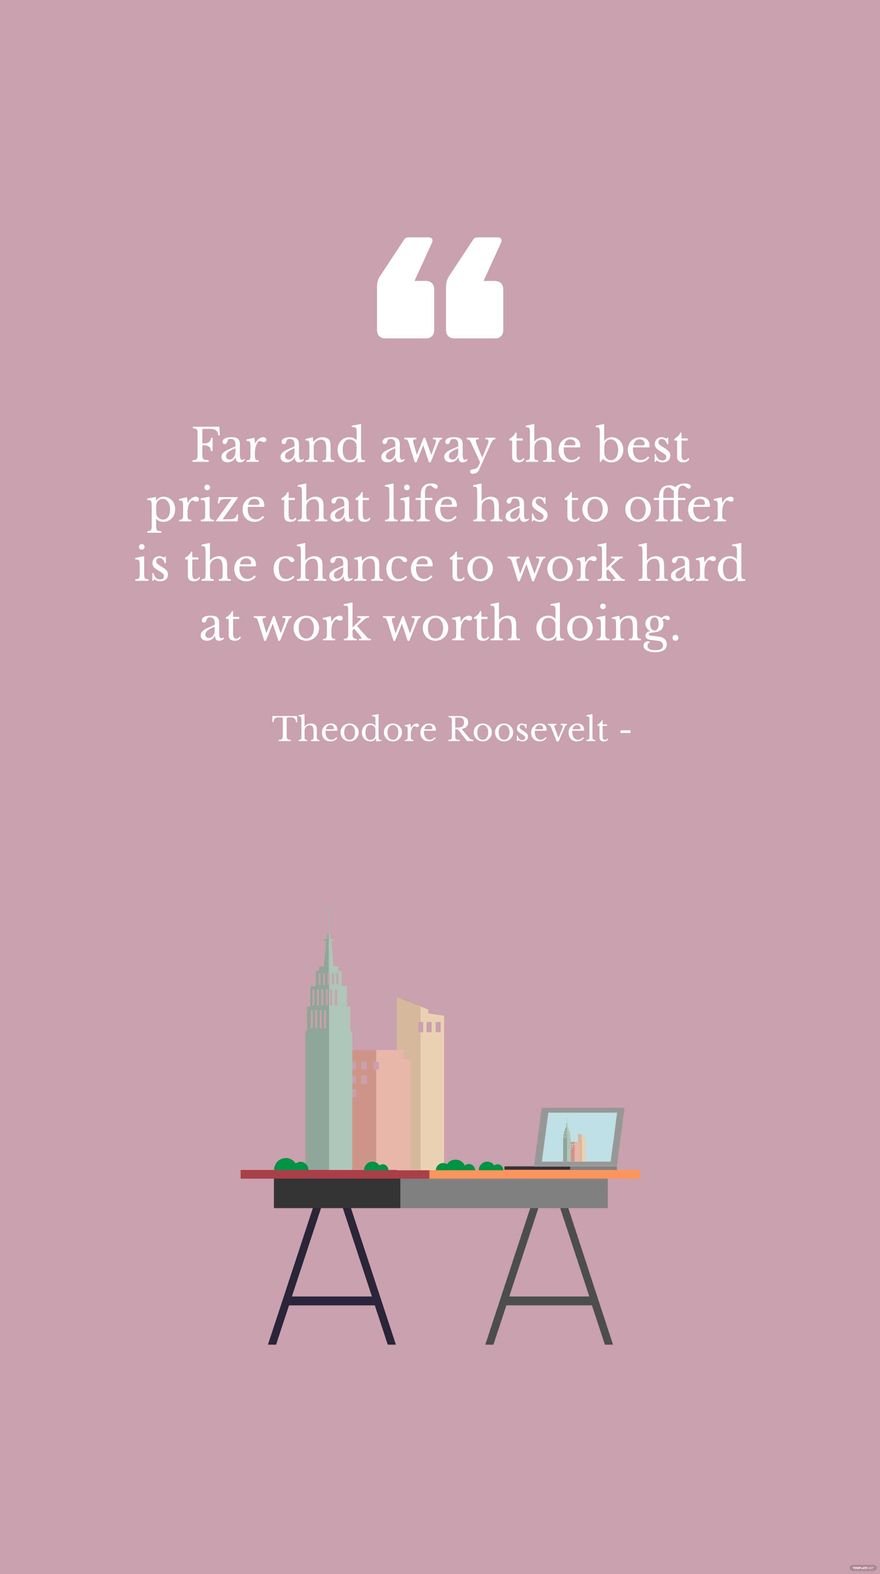 Theodore Roosevelt - Far and away the best prize that life has to offer is the chance to work hard at work worth doing.